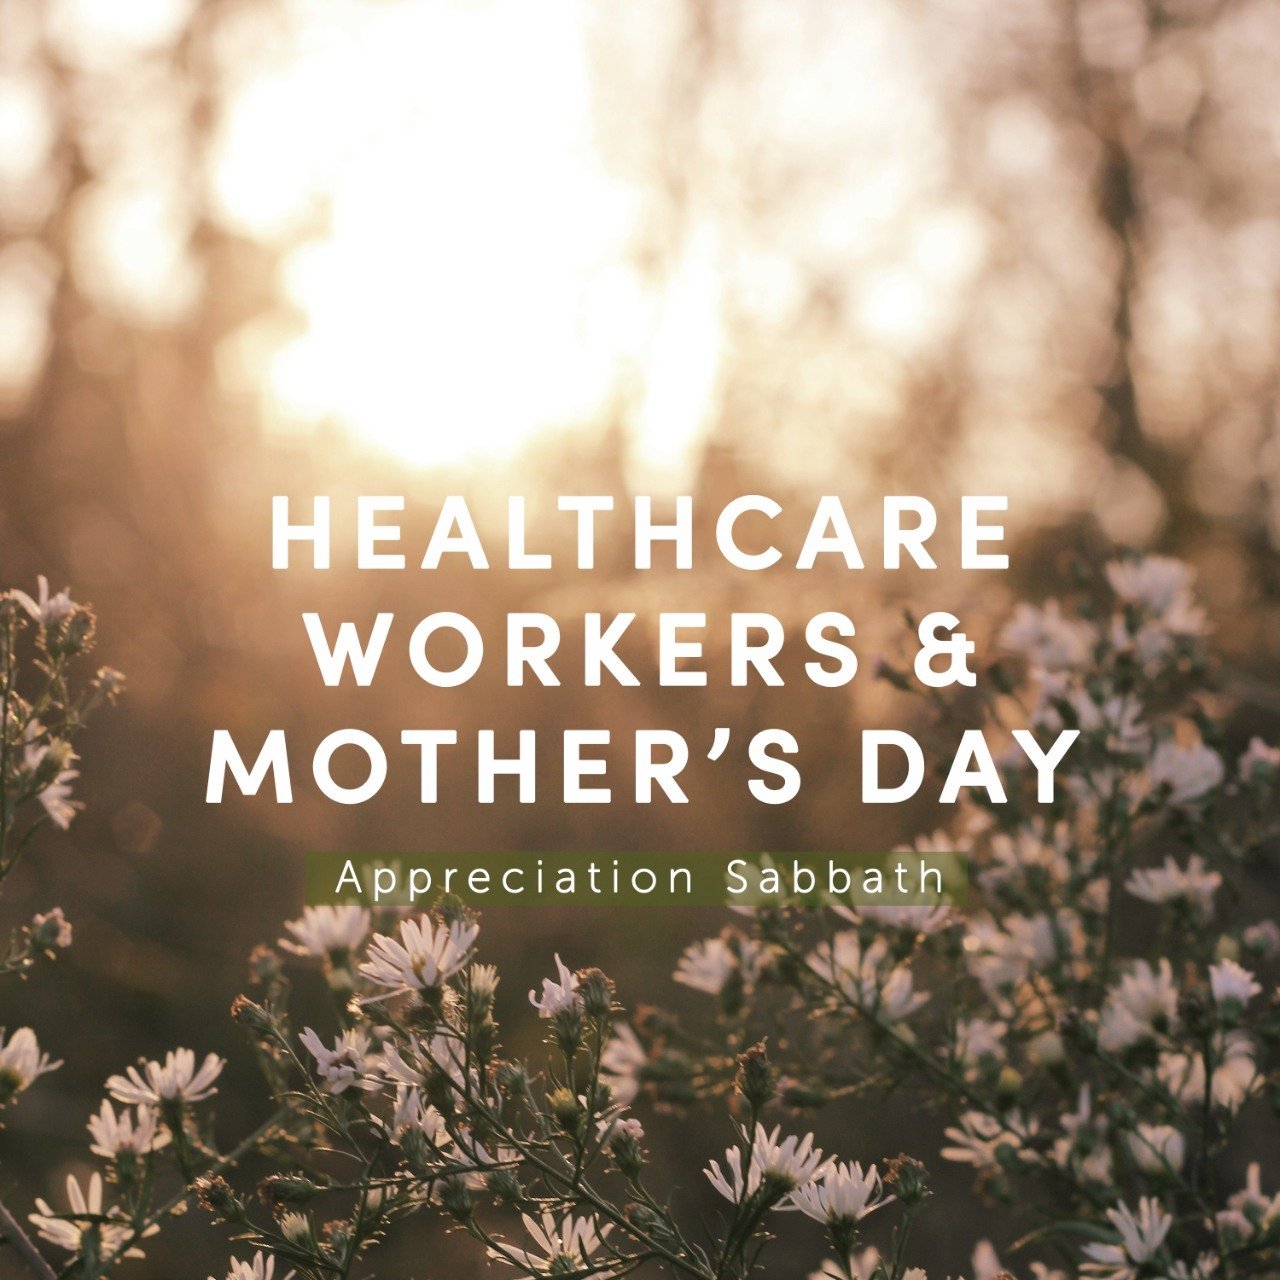 Tomorrow is our Healthcare Workers Appreciation Sabbath as well as Mother's Day weekend Sabbath. Dr. Richard Hart, president of Loma Linda University Health, is speaking for all four services. Join us in showing our appreciation for these wonderful p